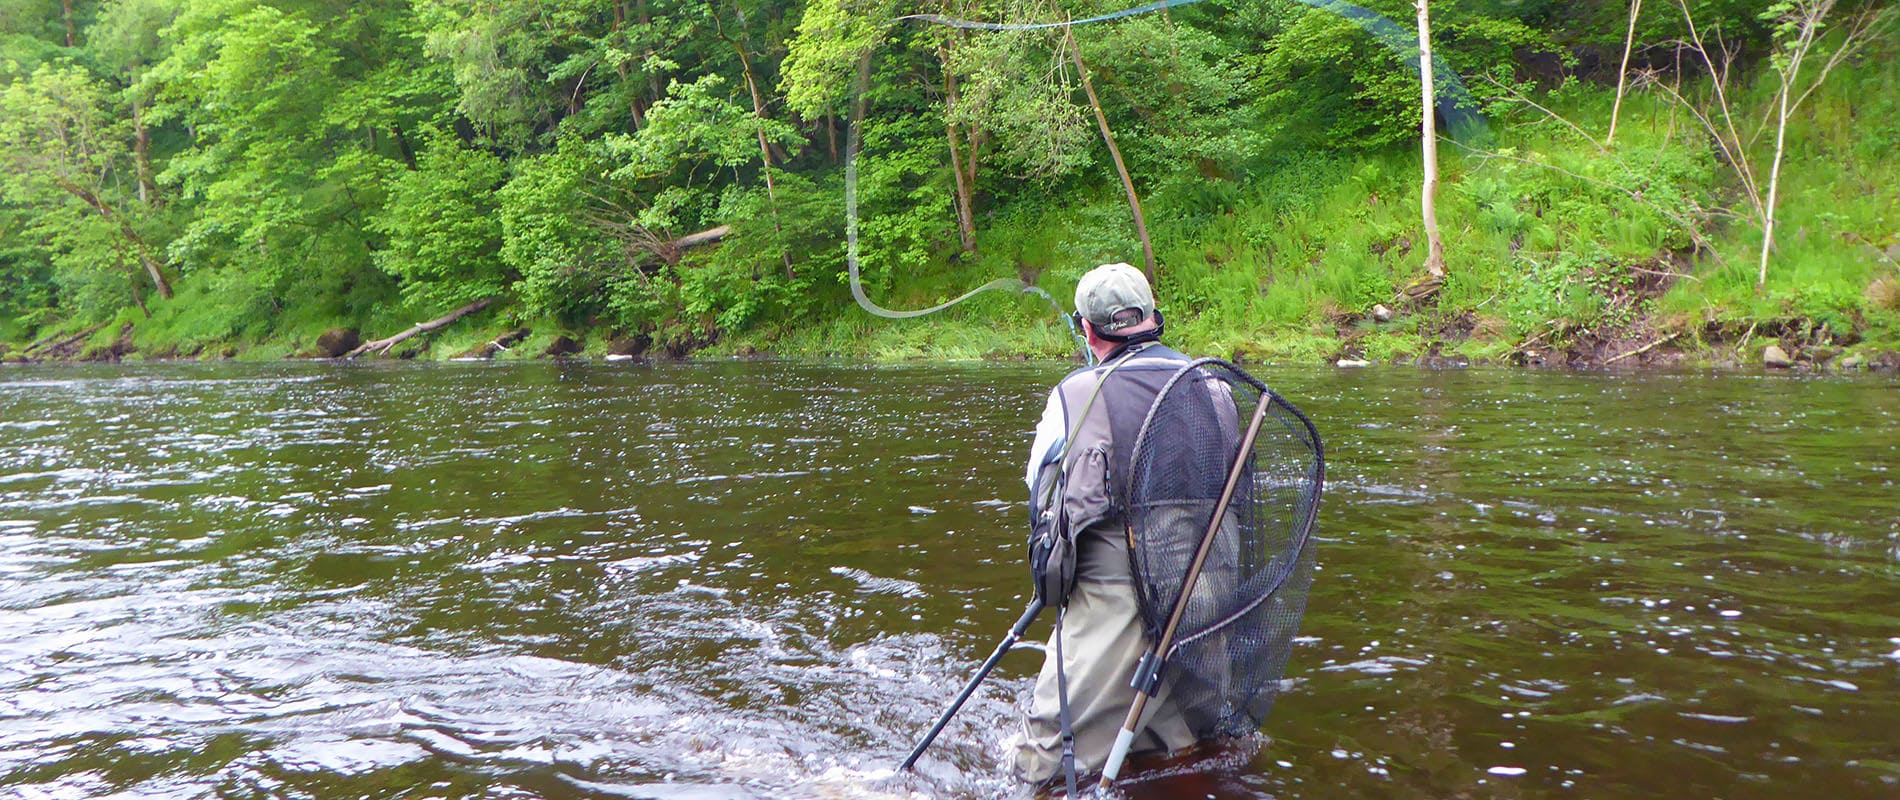 Fly Fishing on the River Tyne